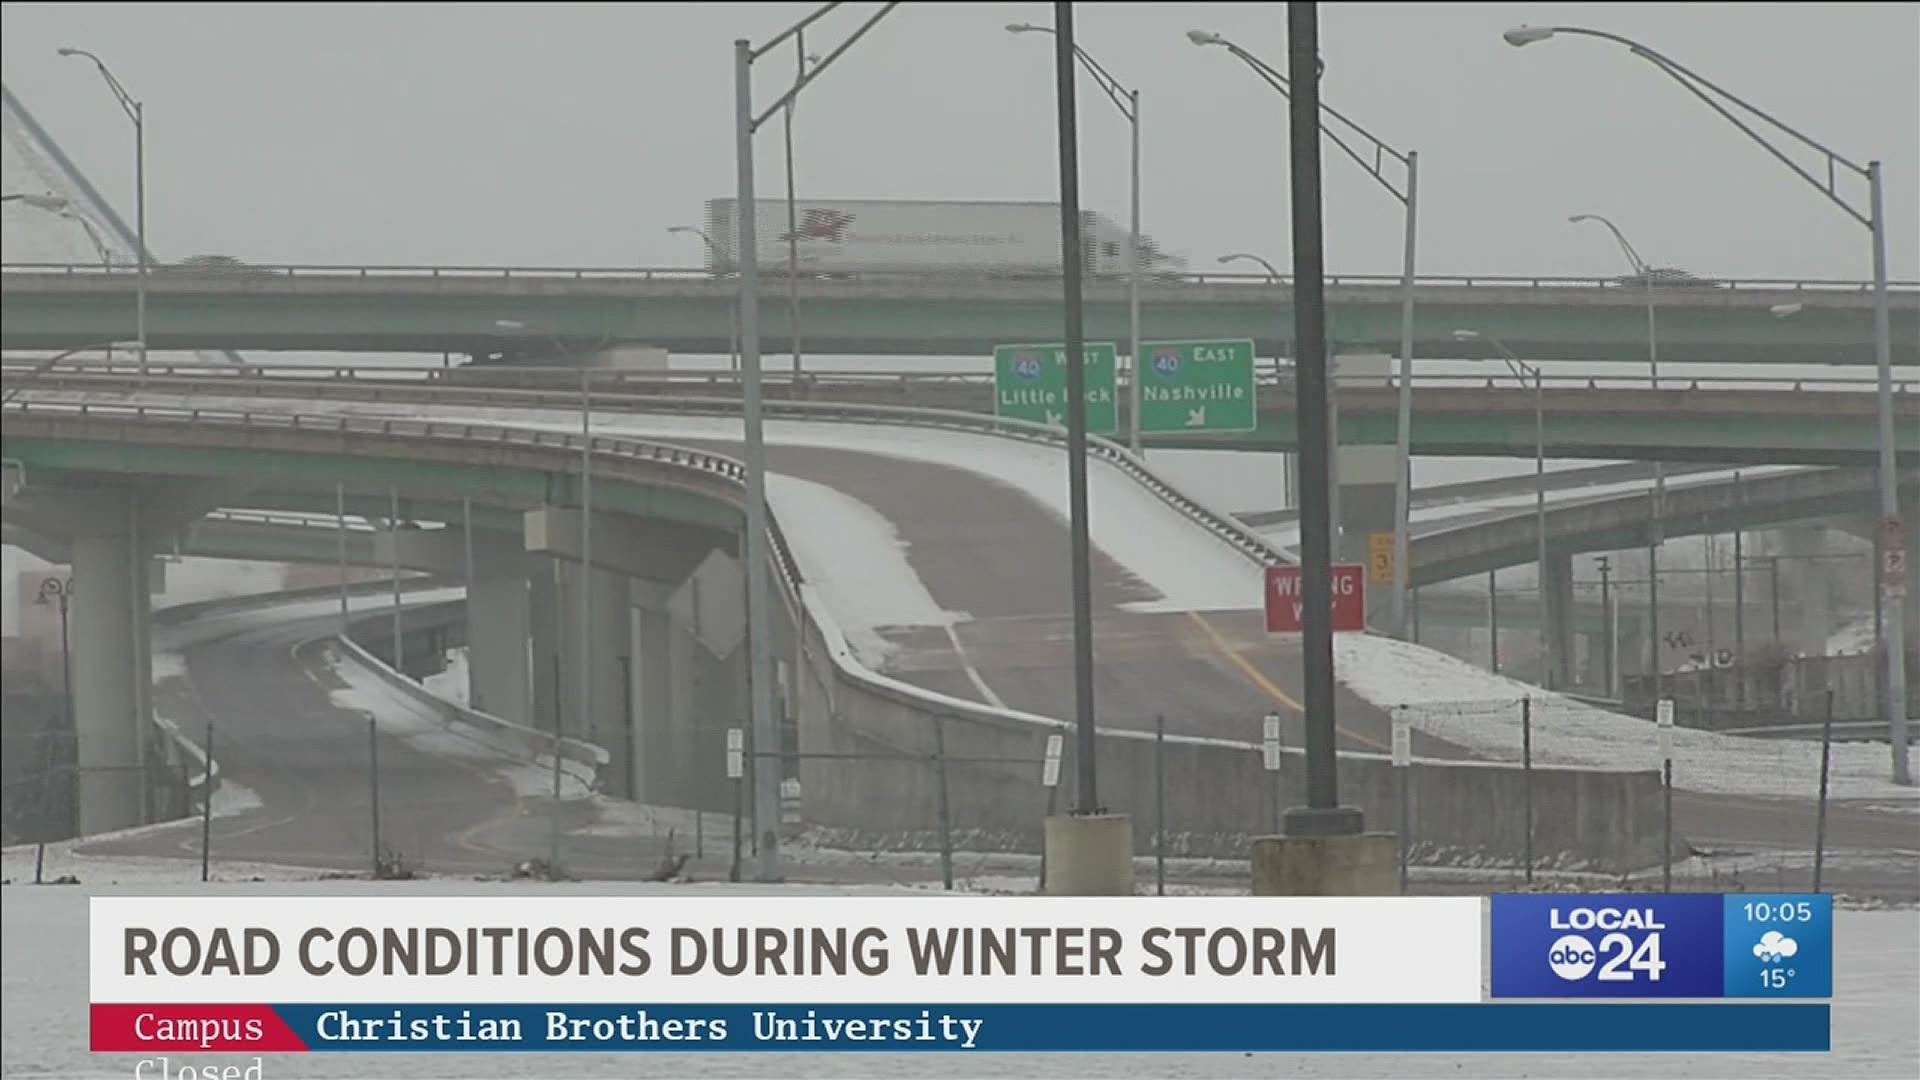 Memphis looks like a winter wonderland, but the weather is dangerously